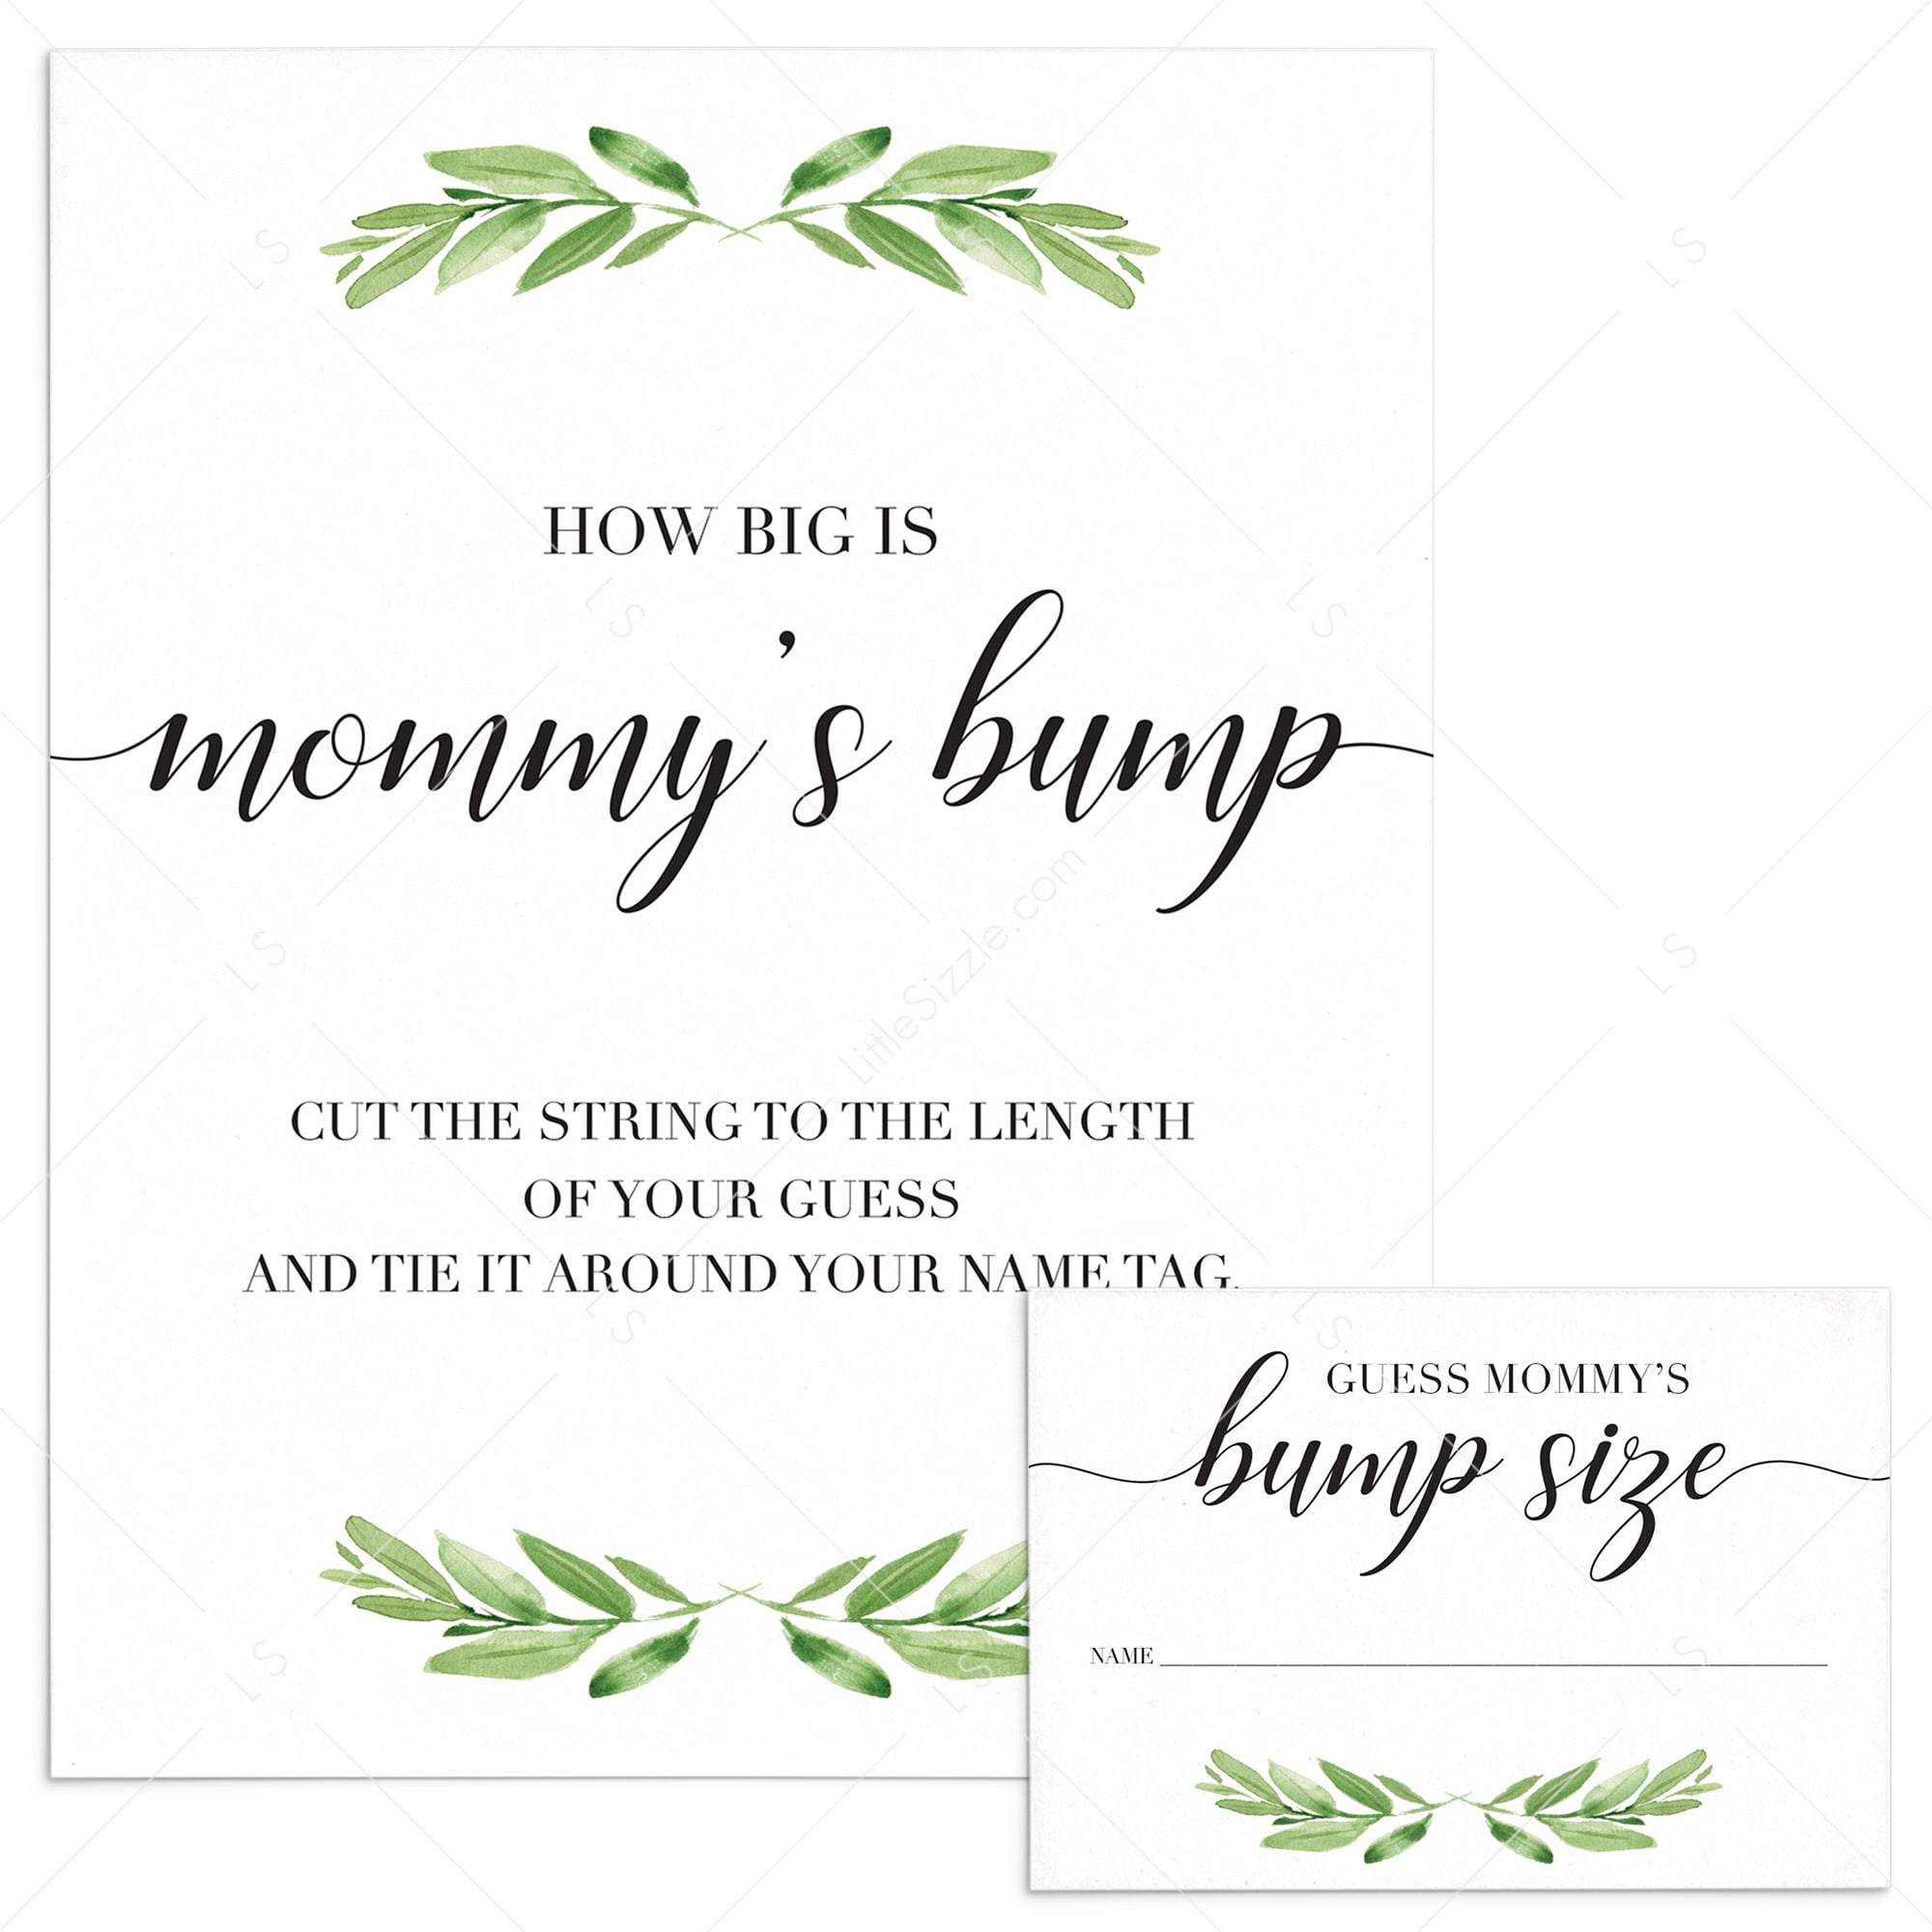 Baby Showers - Baby Shower Game: Guess the Bump